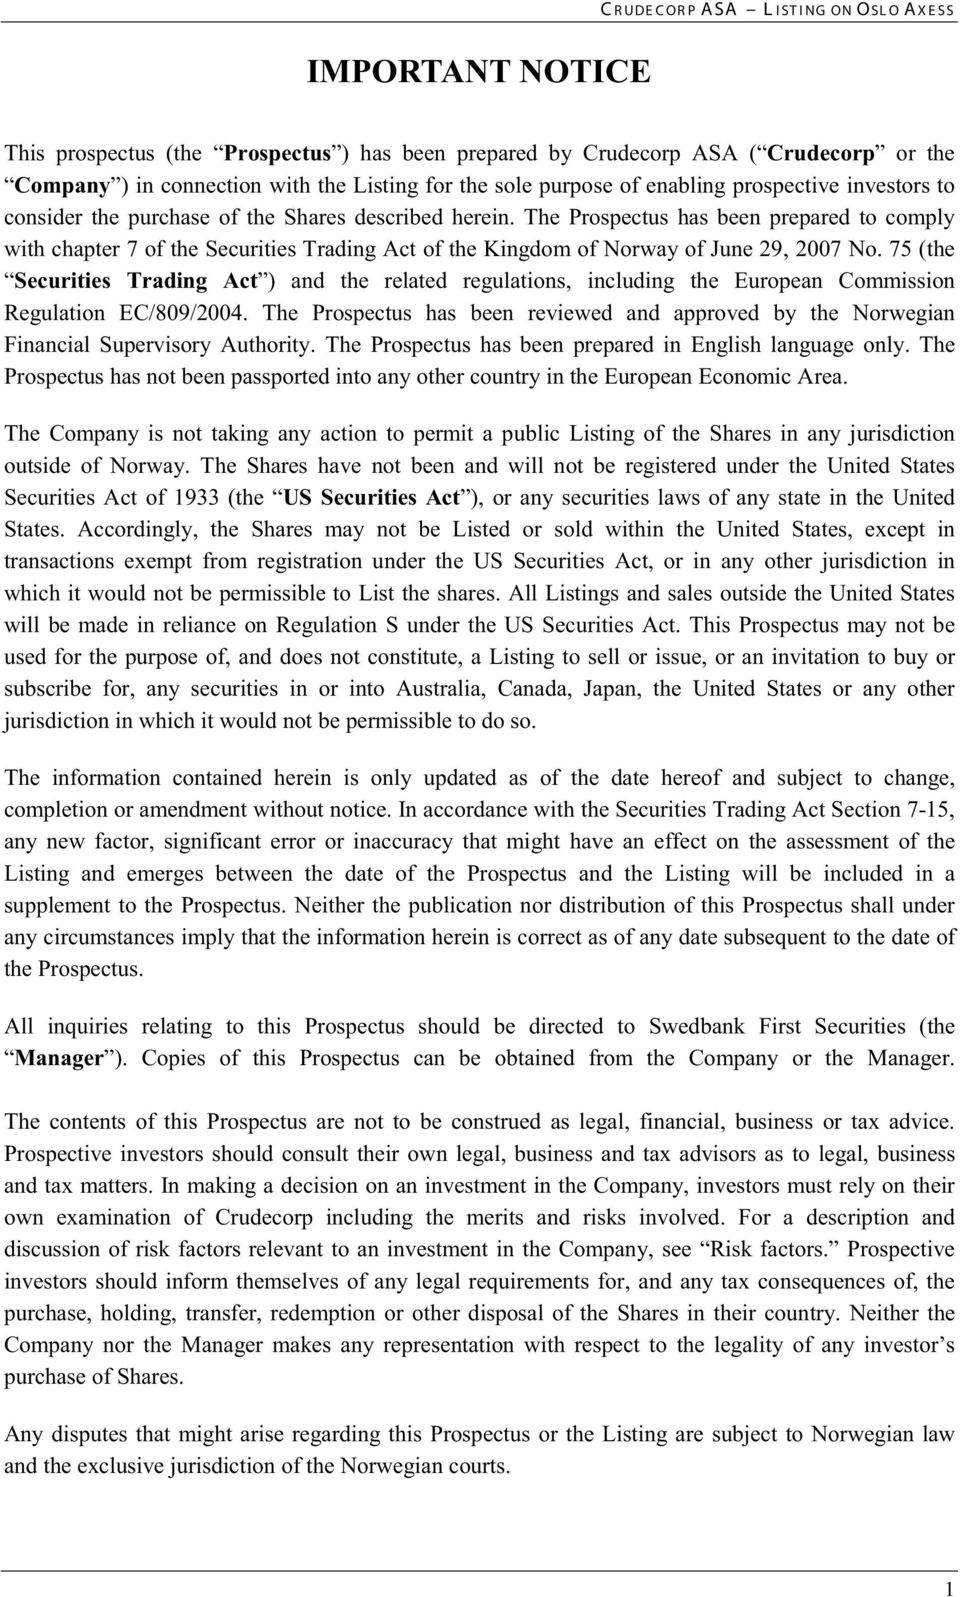 The Prospectus has been prepared to comply with chapter 7 of the Securities Trading Act of the Kingdom of Norway of June 29, 2007 No.